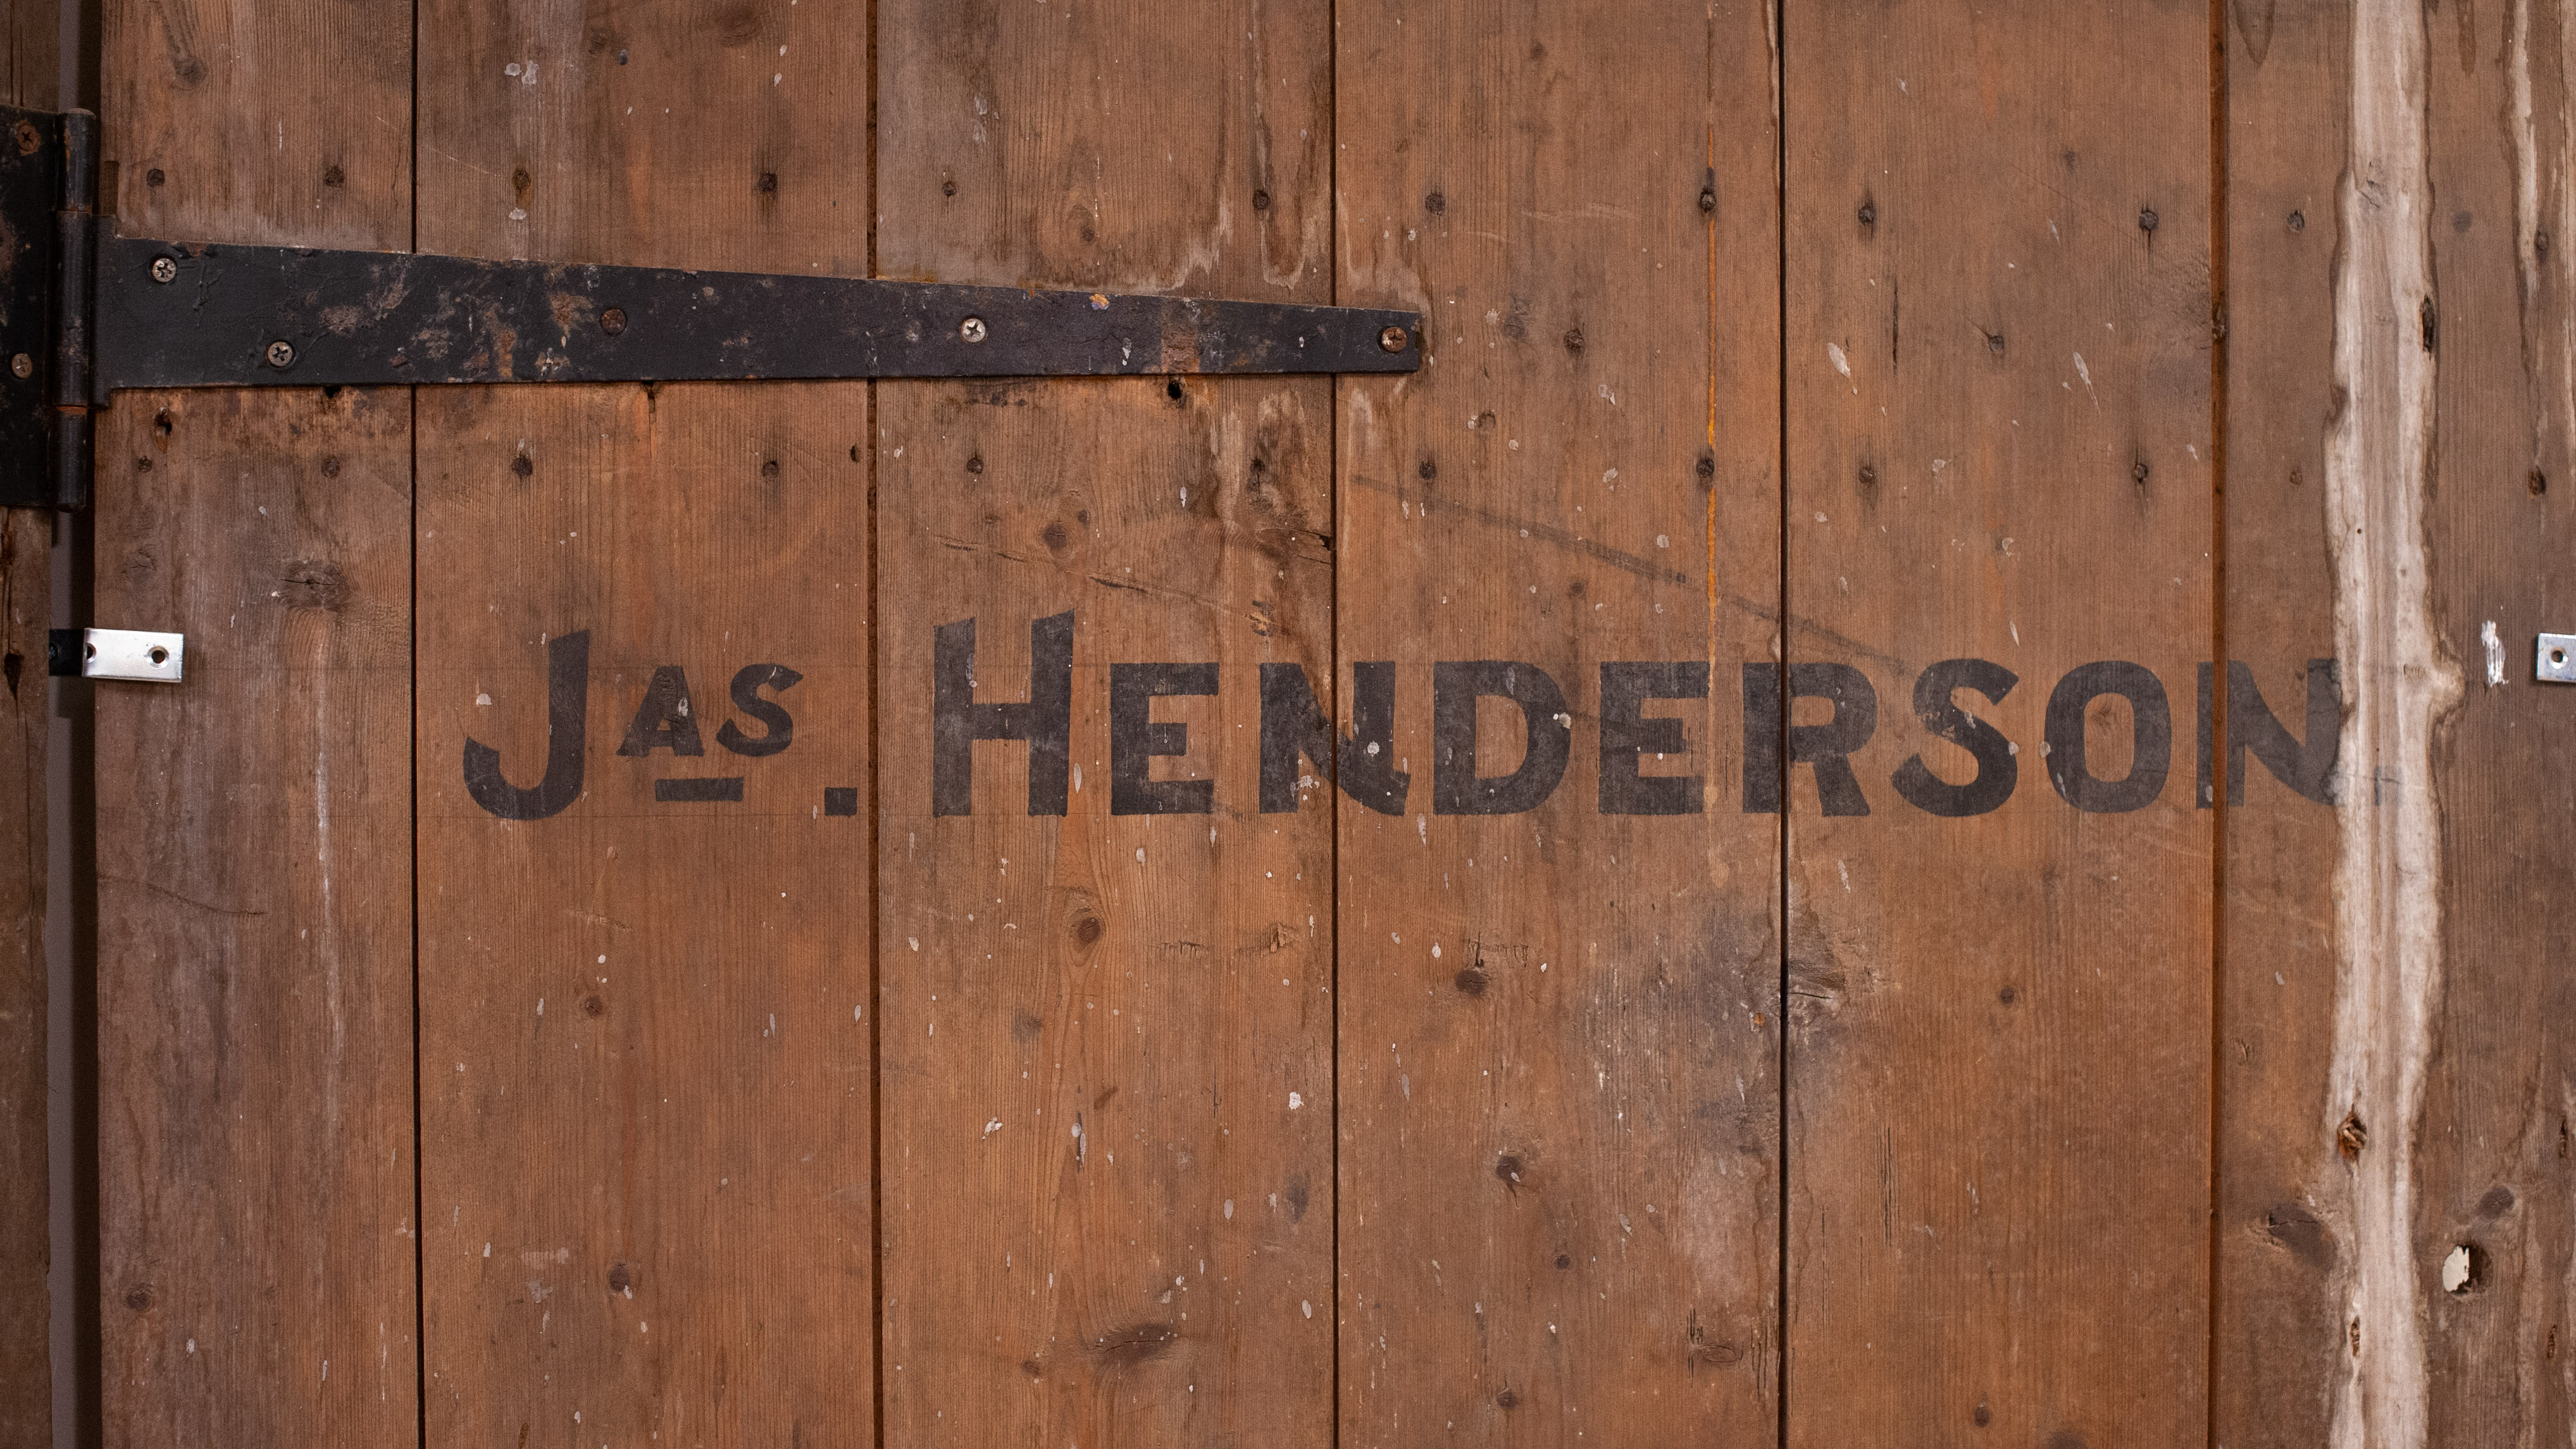 A close-up of a wooden door with old black hinges, water damage, and large black letters that read ‘Jas. Henderson.’